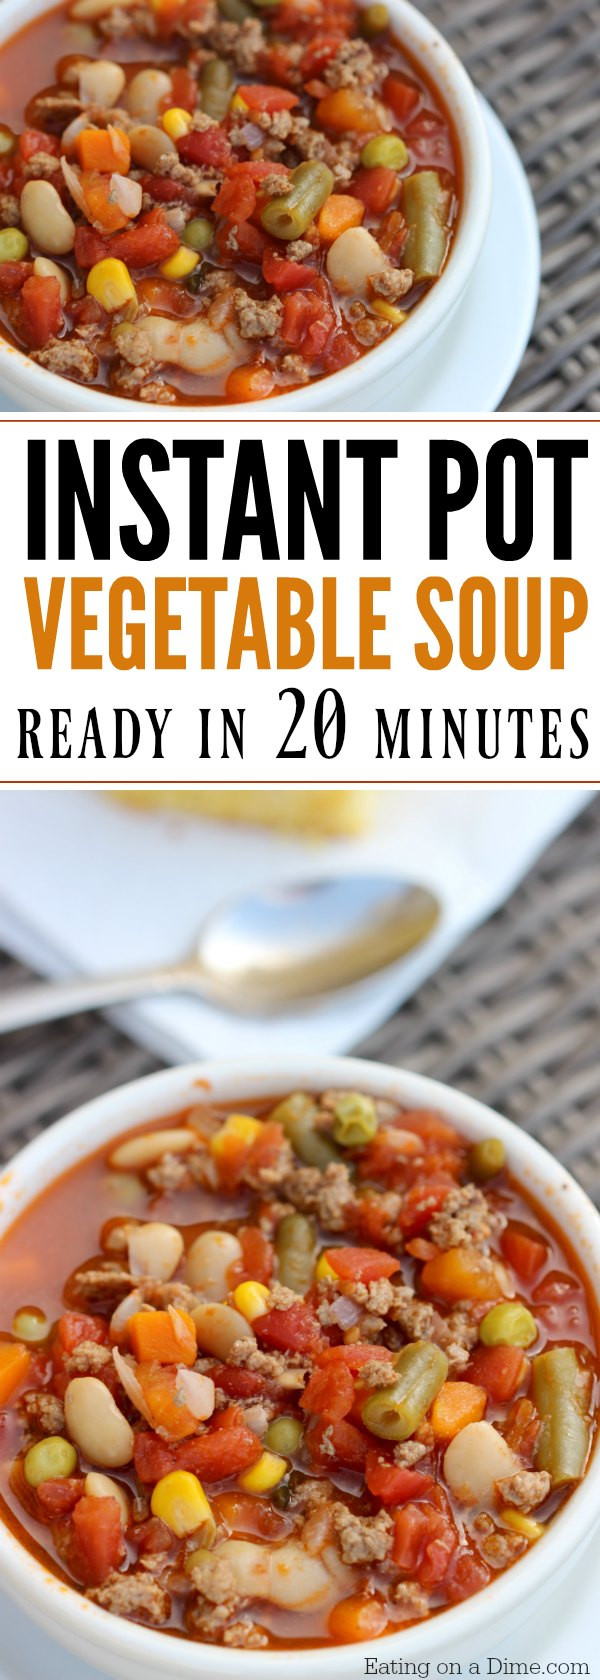 Vegetable Beef Soup Instant Pot
 Instant Pot Beef Ve able Soup Recipe Eating on a Dime